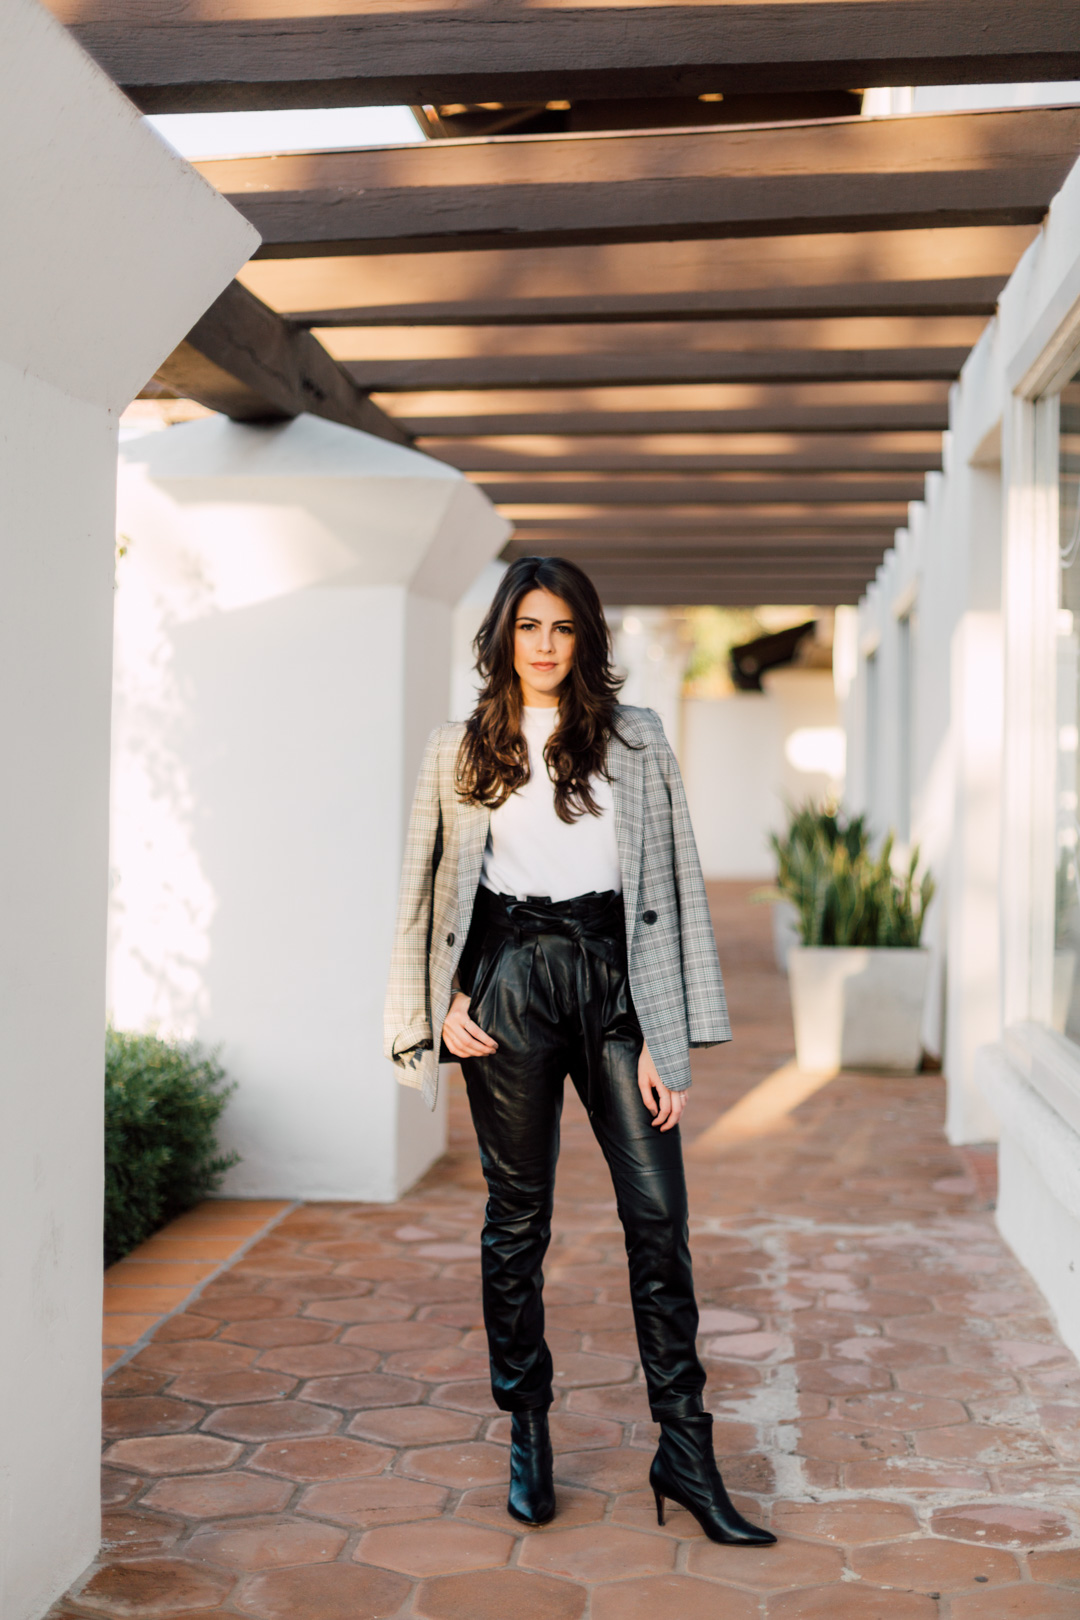 Jackie Roque Salas styling leather pants, Anine Bing blazer and a white tee in Malibu.